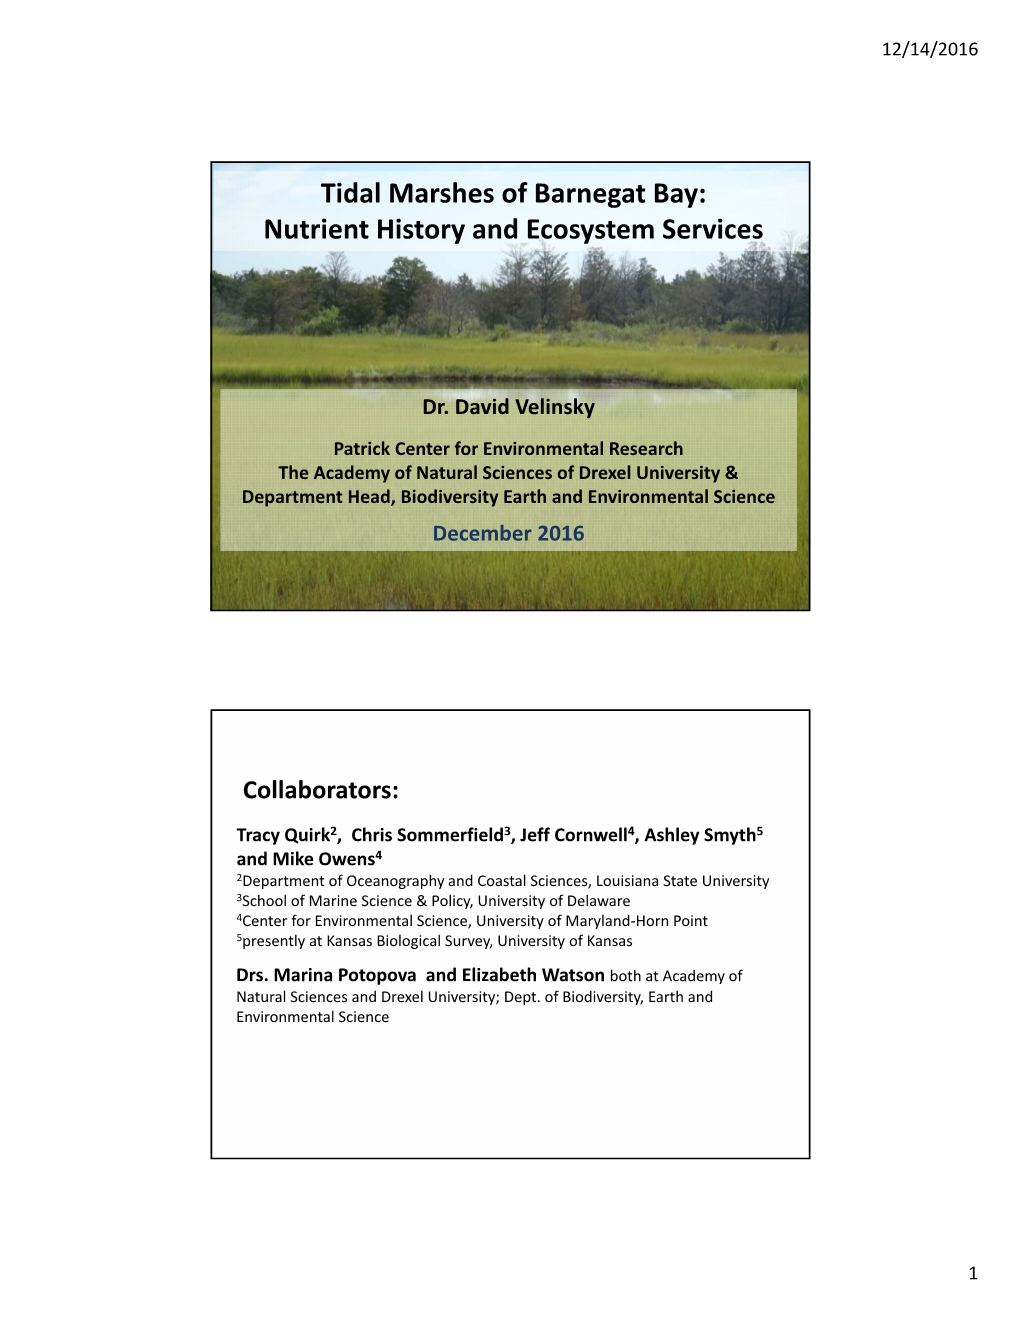 Tidal Marshes of Barnegat Bay: Nutrient History and Ecosystem Services